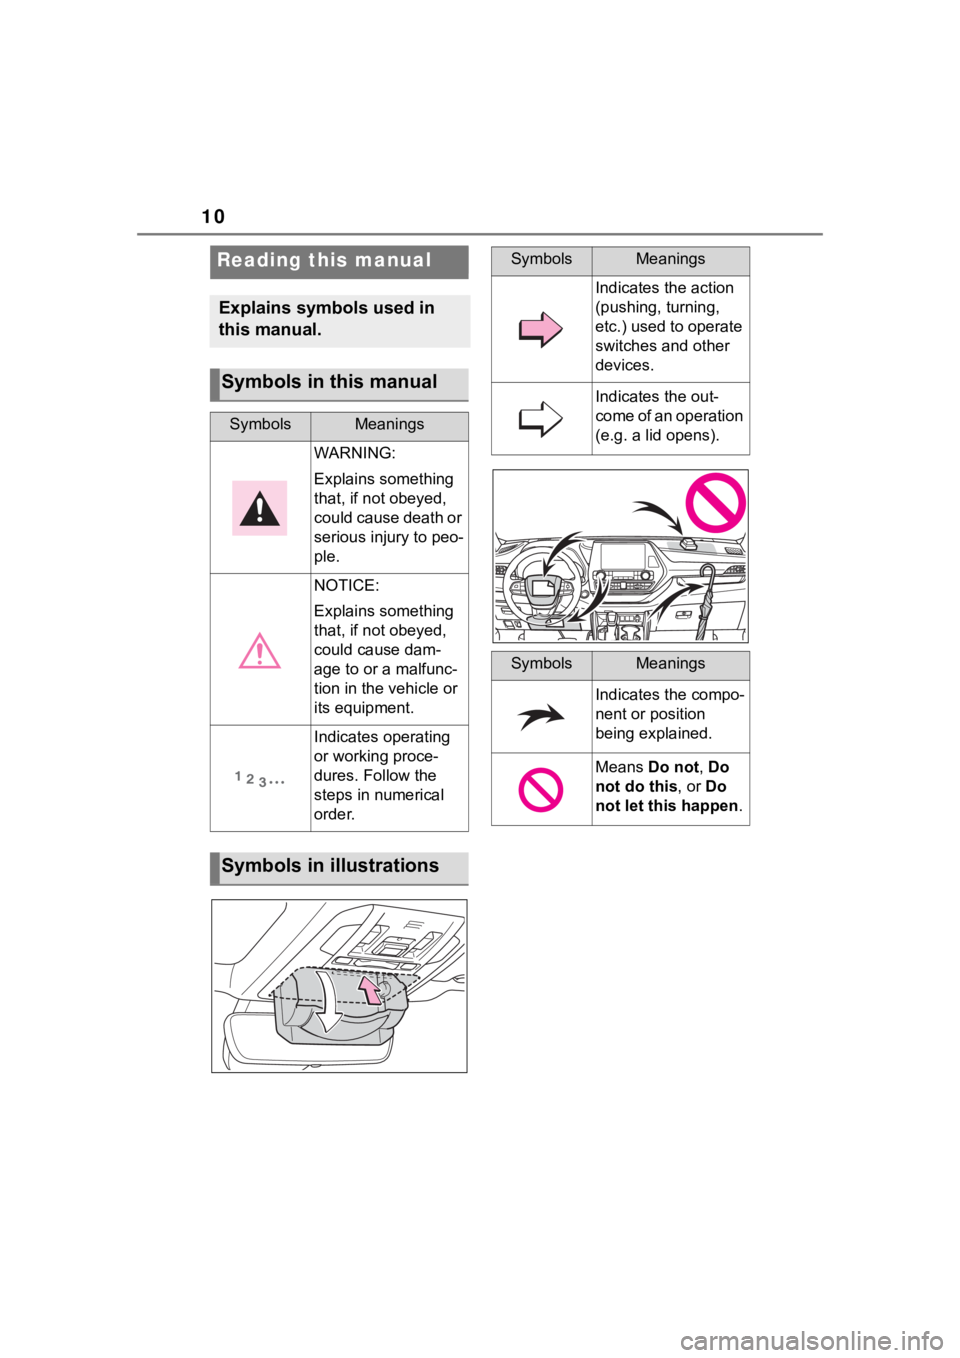 TOYOTA HIGHLANDER 2023  Owners Manual 10
Reading this manual
Explains symbols used in 
this manual.
Symbols in this manual
SymbolsMeanings
WARNING:
Explains something 
that, if not obeyed, 
could cause death or 
serious injury to peo-
ple